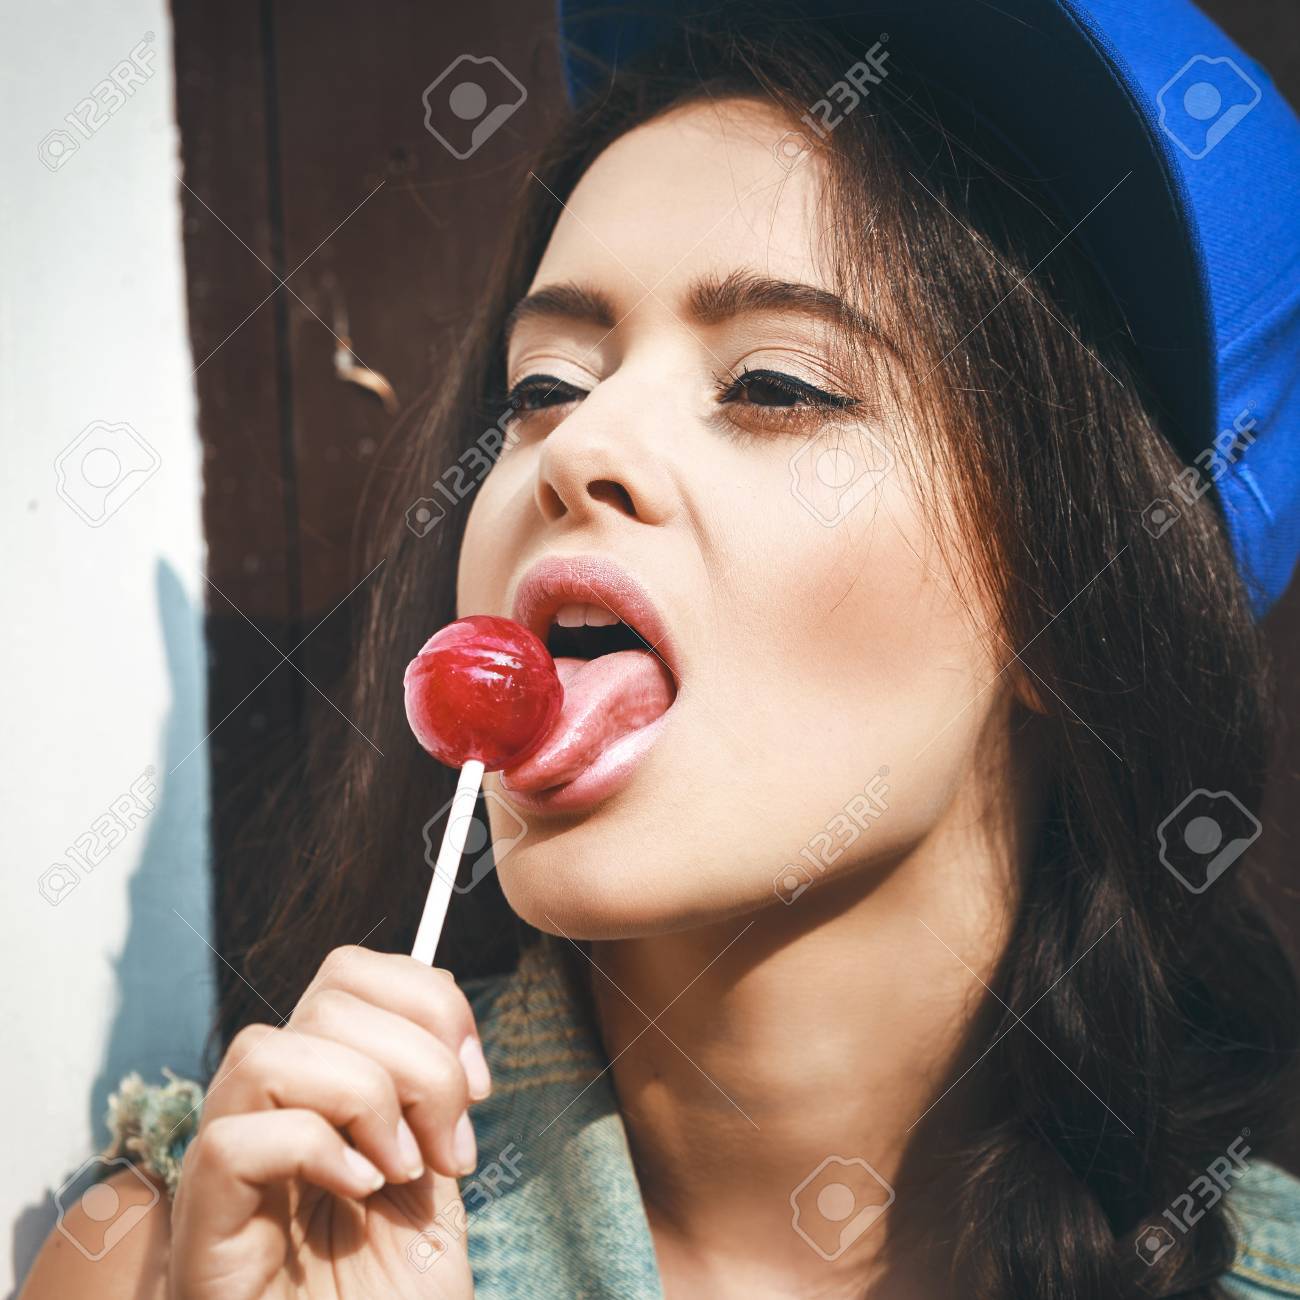 daisy durham recommends girl sucking on lollipop pic